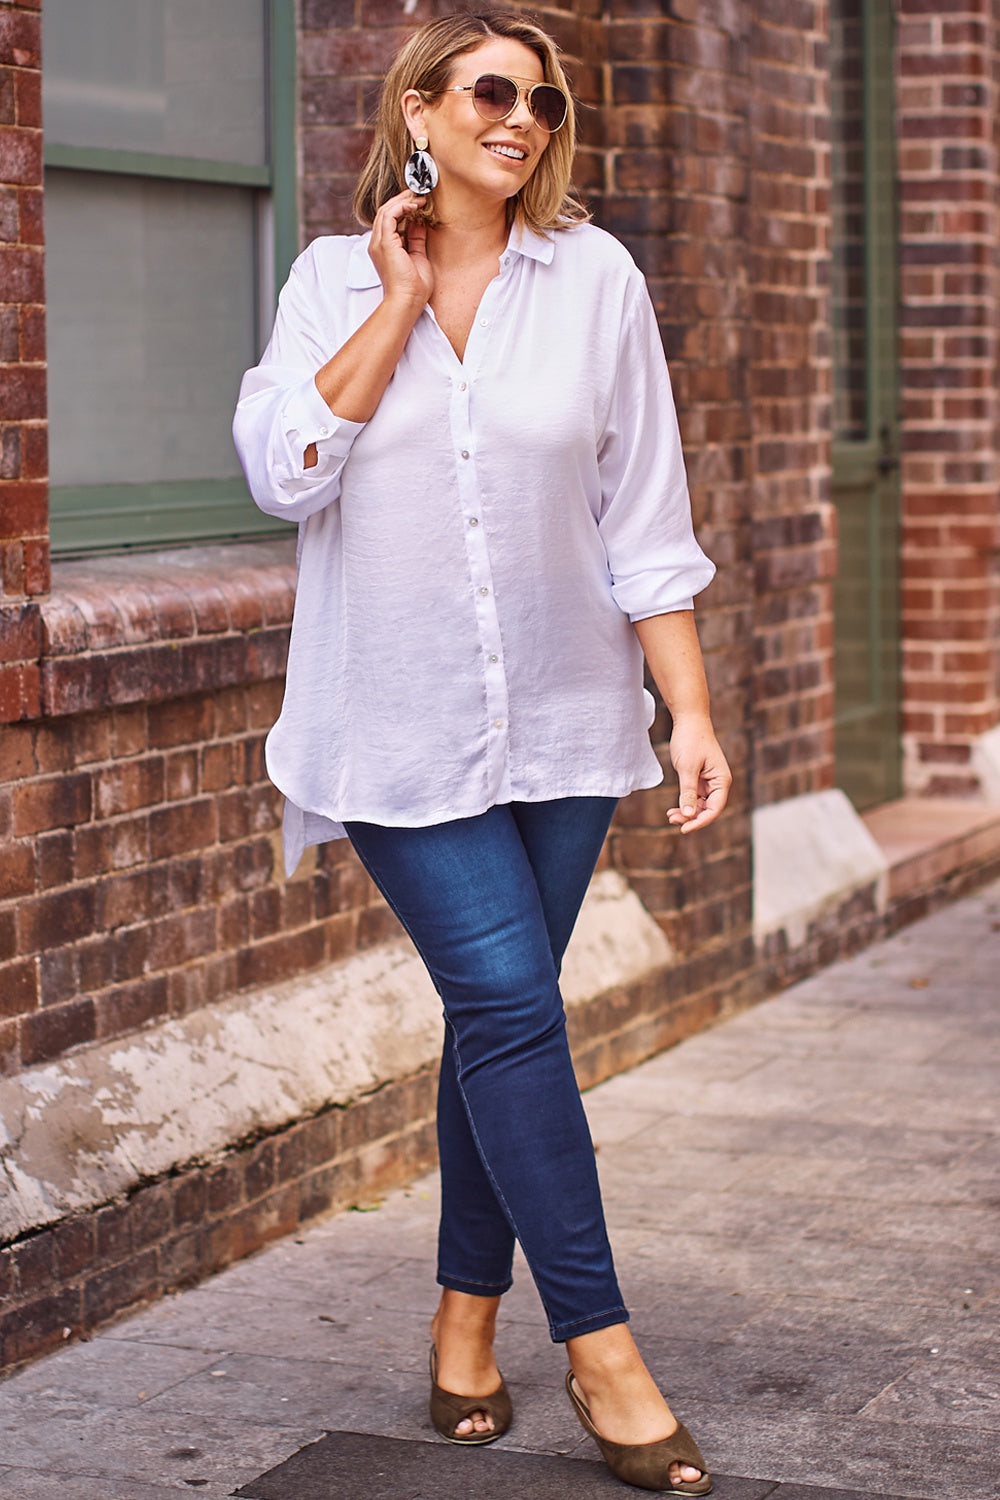 Briella Long Sleeve Collared Shirt in White Tops